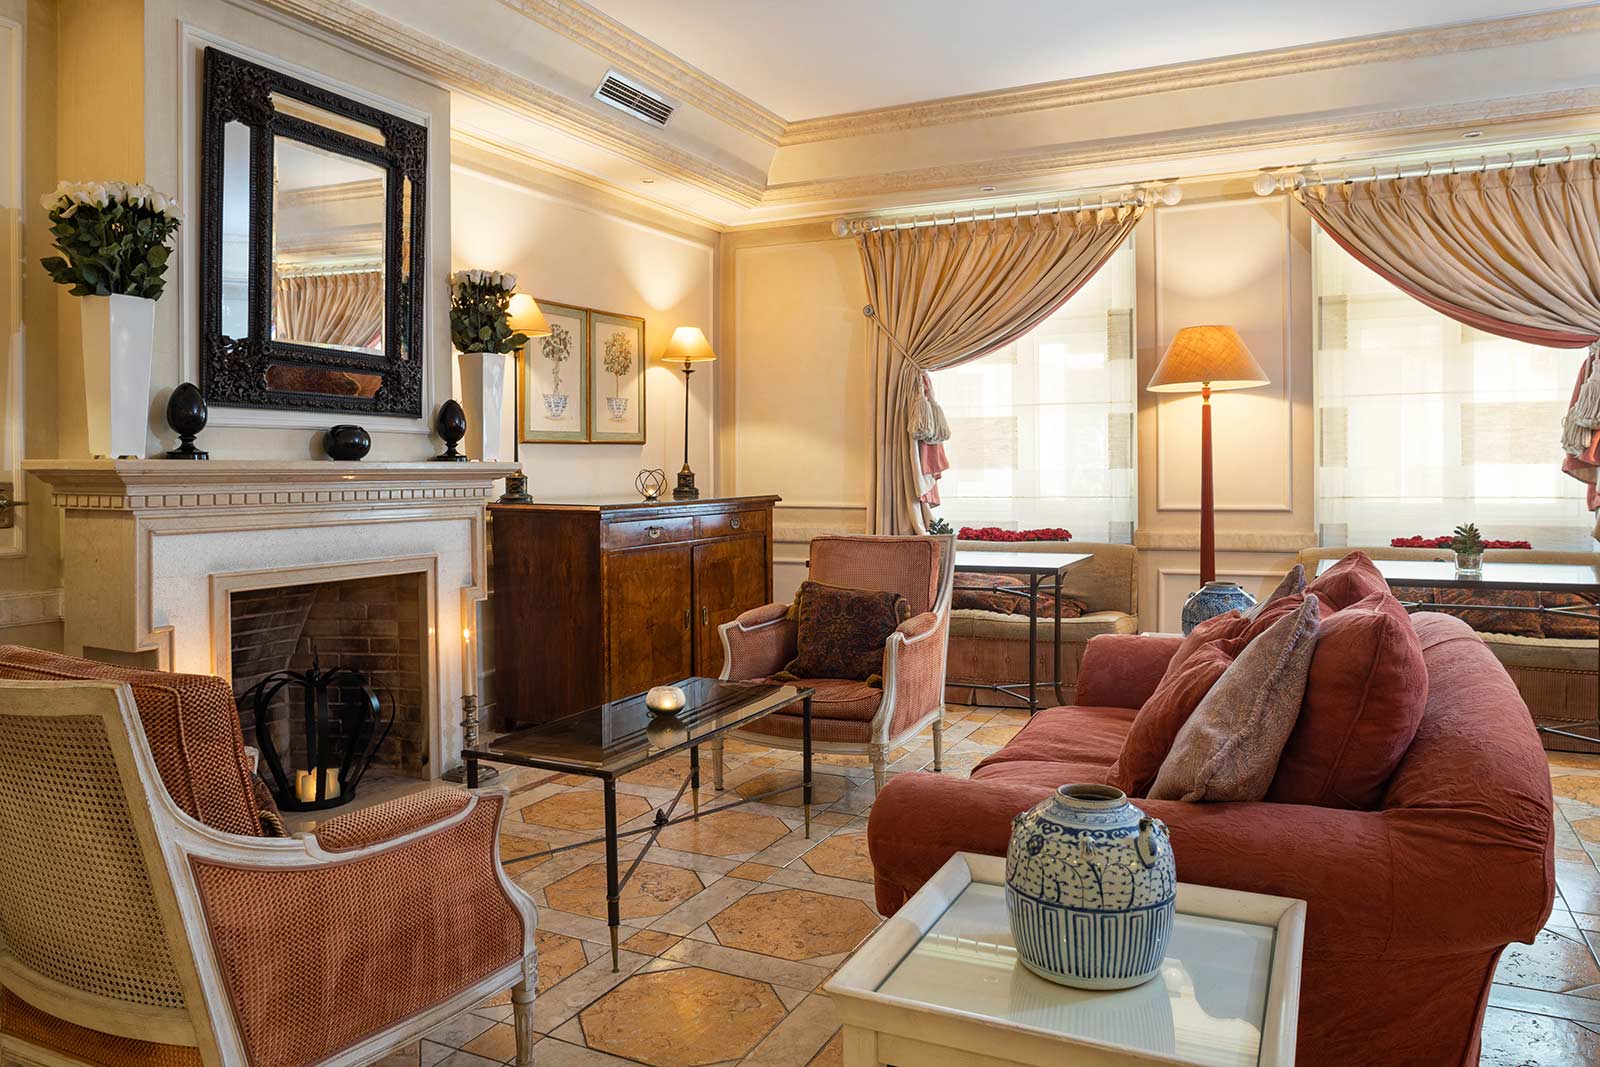 Lisbon Heritage Hotels have four units in the Best of the Best of the Travellers' Choice Awards